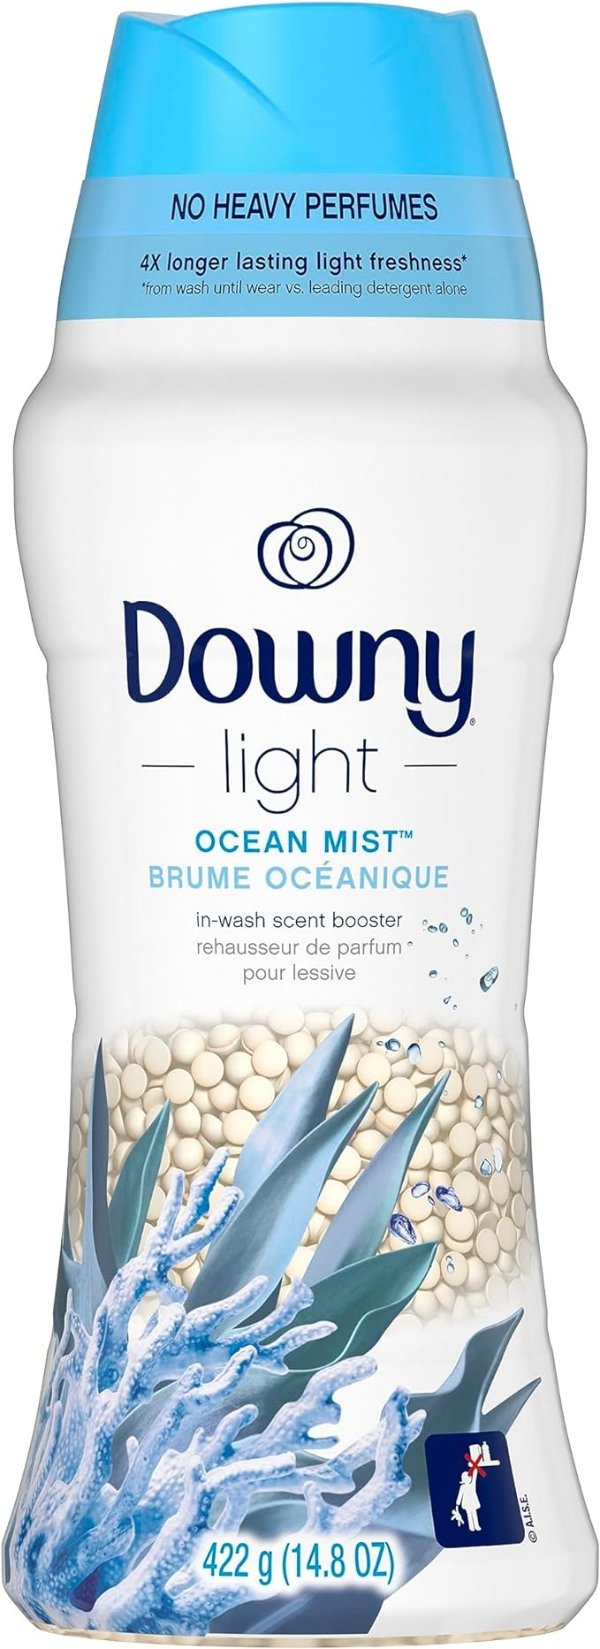 Light Laundry Scent Booster Beads for Washer, Ocean Mist, 14.8 oz, with No Heavy Perfumes